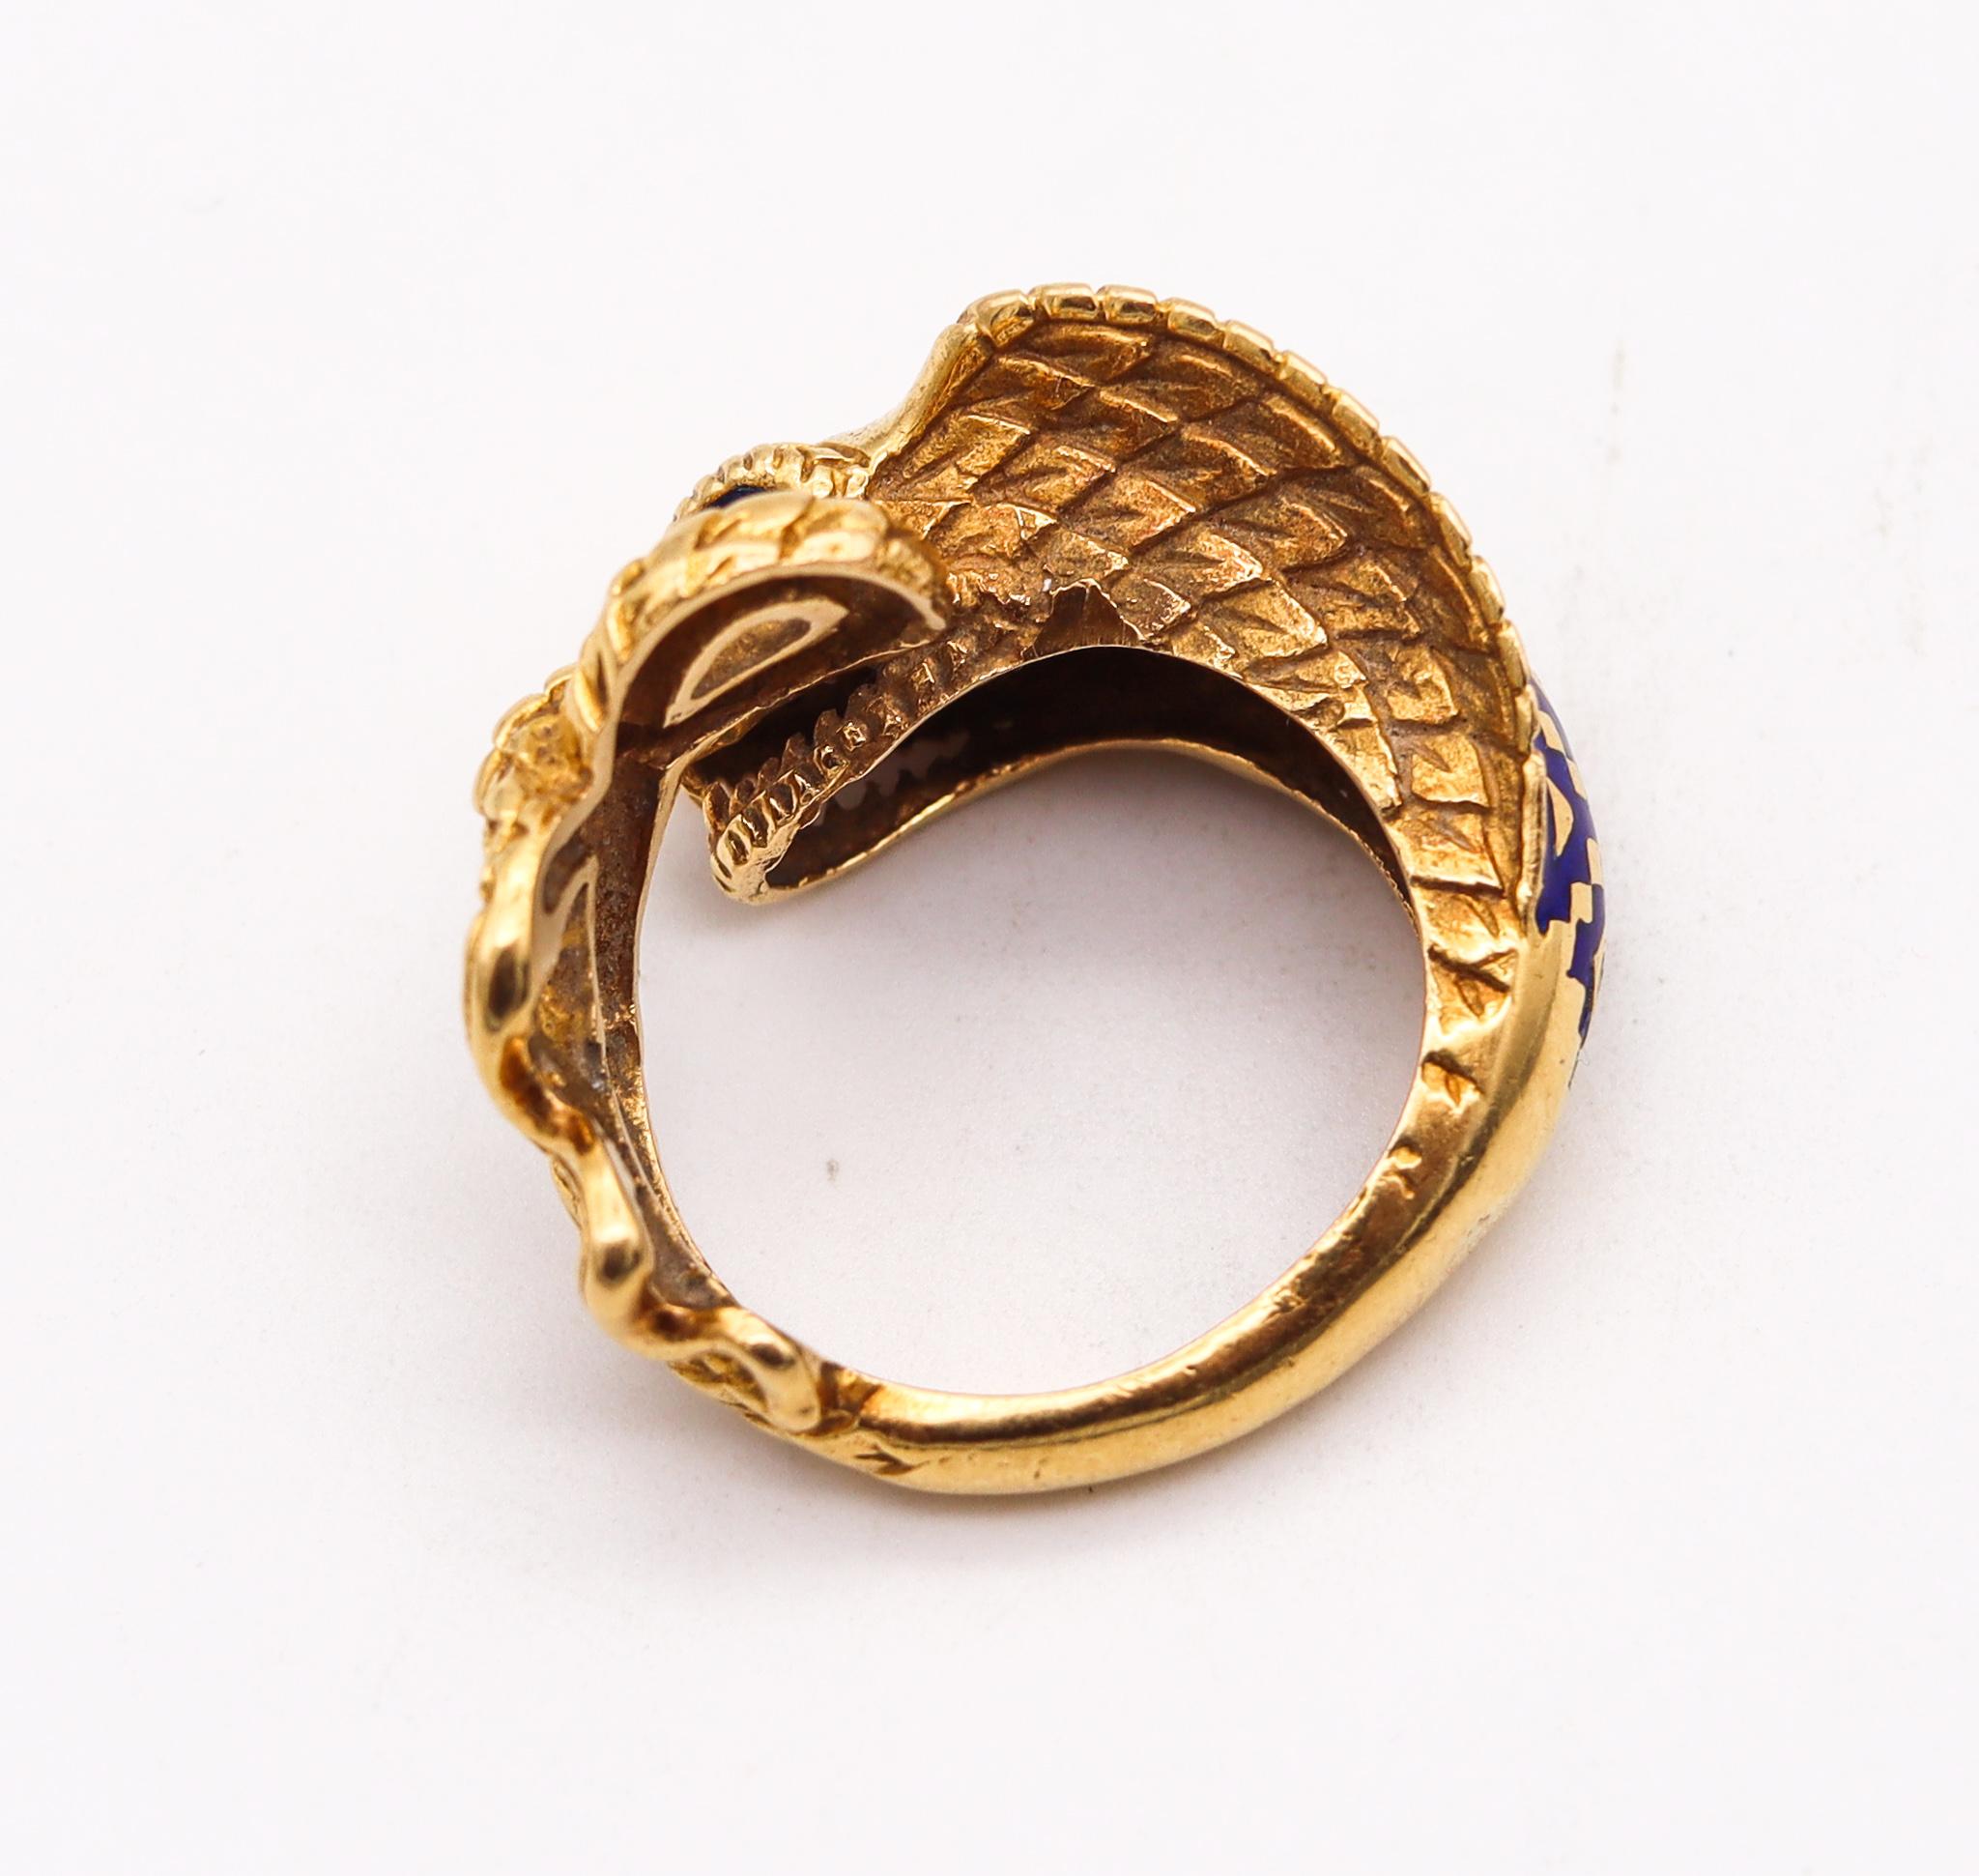 Etruscan Revival Sculpted Cobra Ring in 18kt Yellow Gold with Color Enamel In Excellent Condition For Sale In Miami, FL